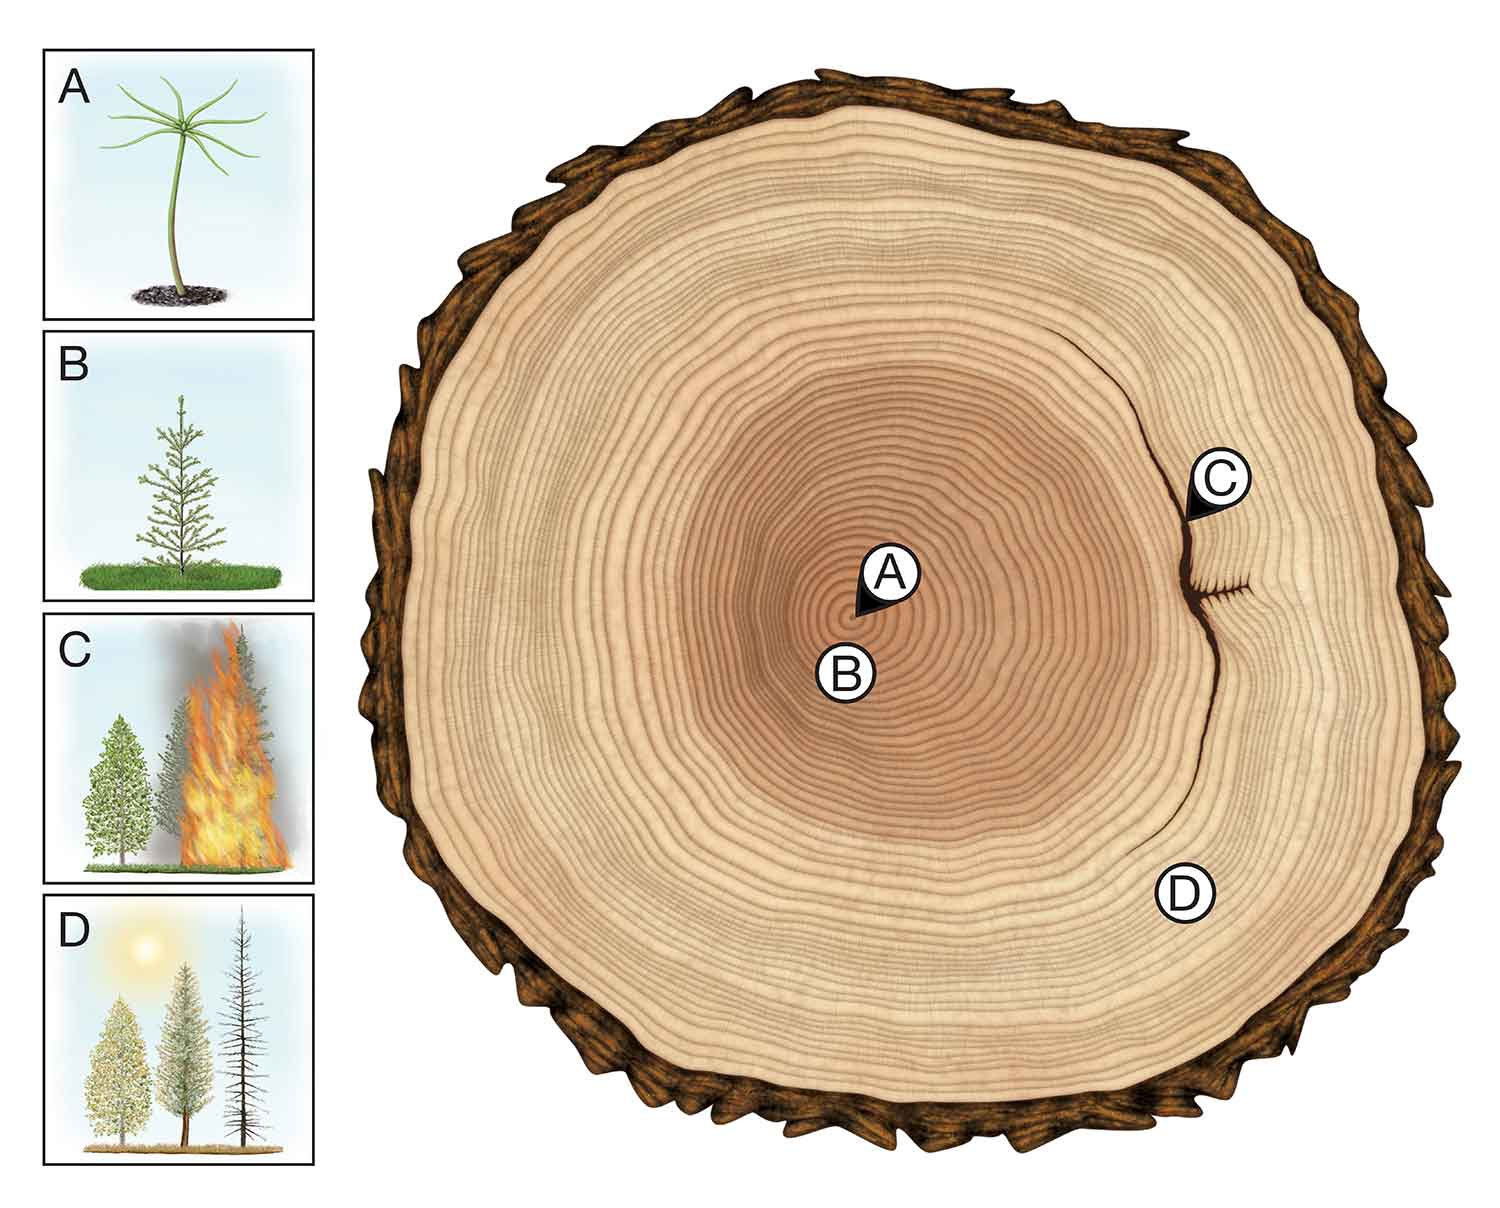 Diagram of tree rings with labels showing how fire and sunlight affected the rings